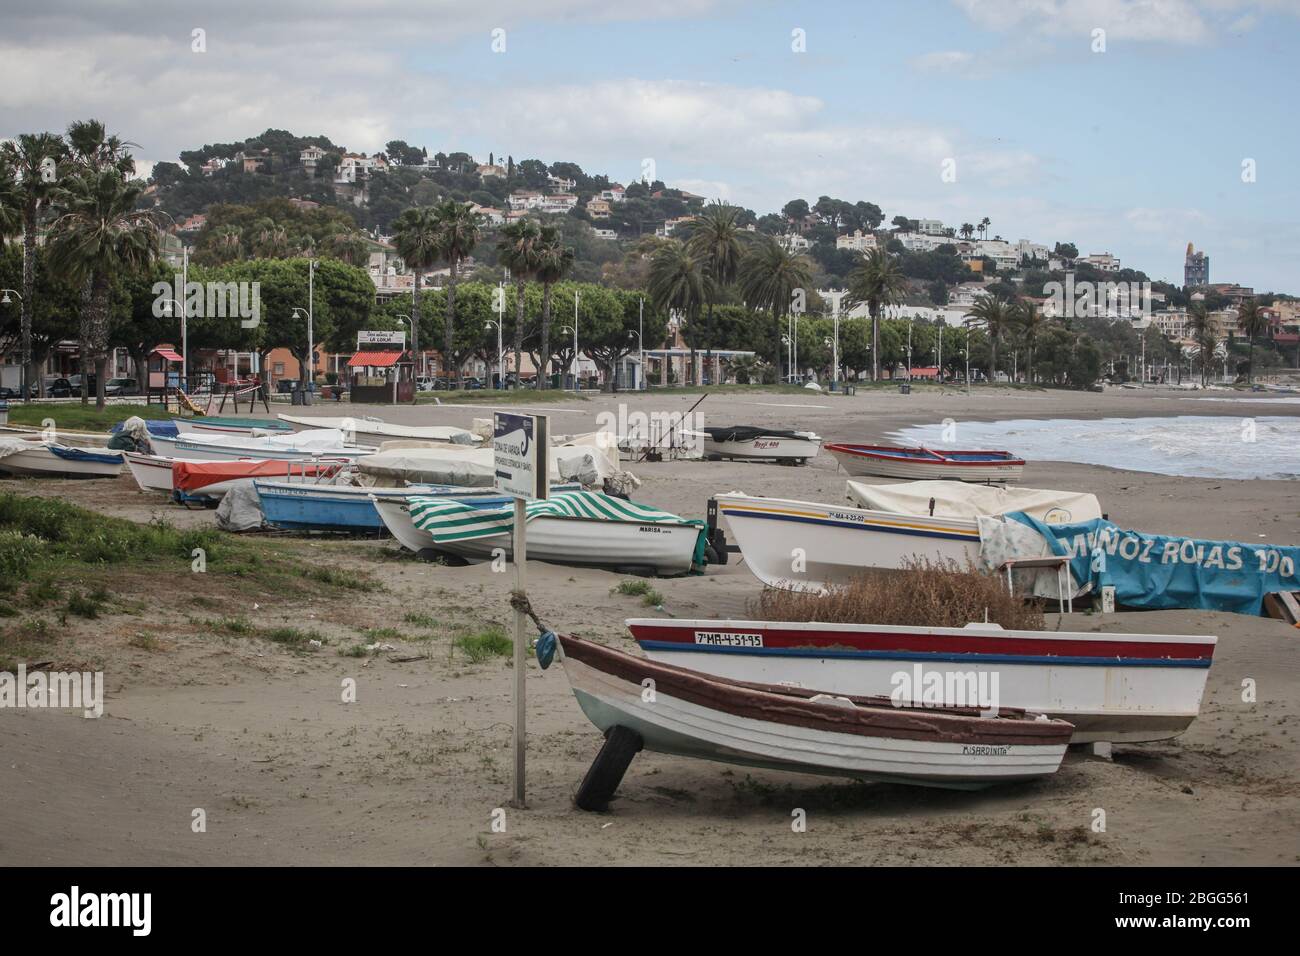 April 21, 2020: 21 April 2020 (Malaga) The beaches and the promenade of the areas of Pedregalejo and Del Palo are an unusual and deserted image due to the coronavirus crisis. Credit: Lorenzo Carnero/ZUMA Wire/Alamy Live News Stock Photo